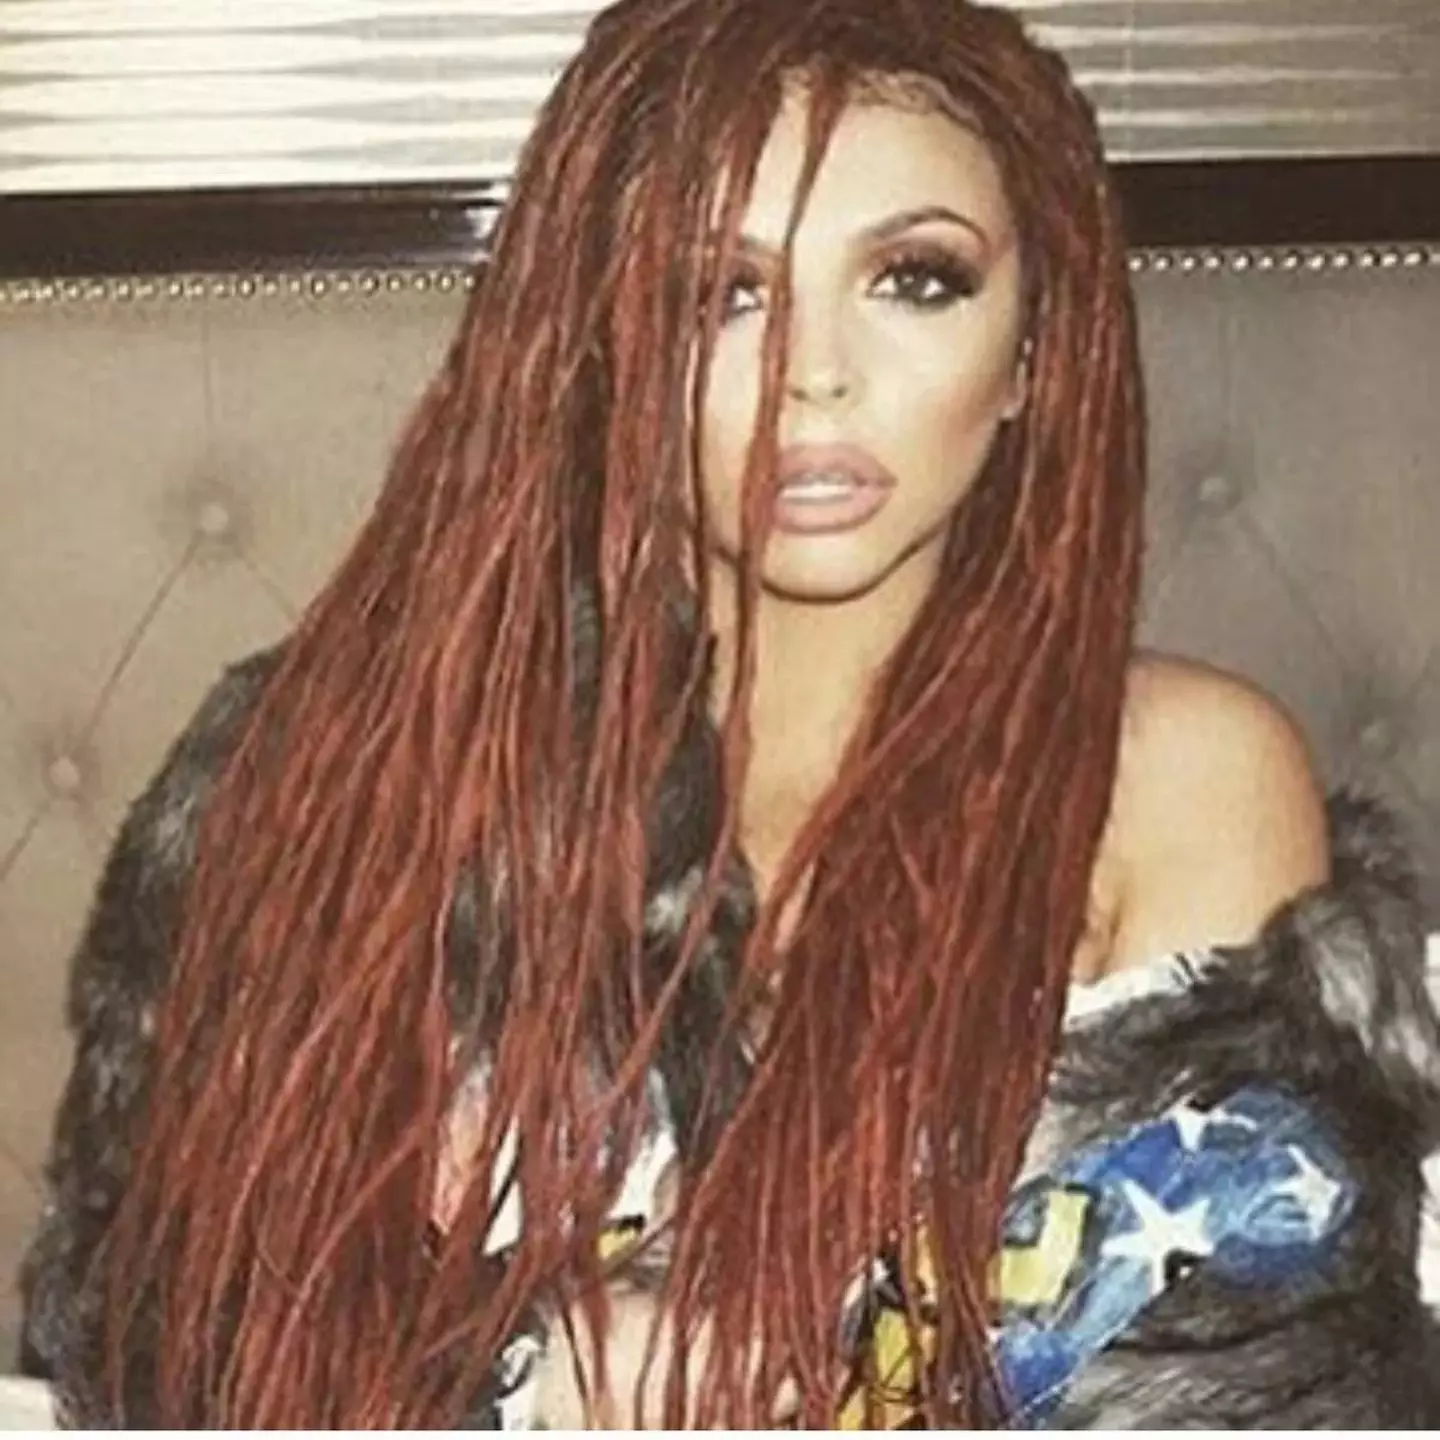 Jesy Nelson responded to blackfishing accusations in an interview (